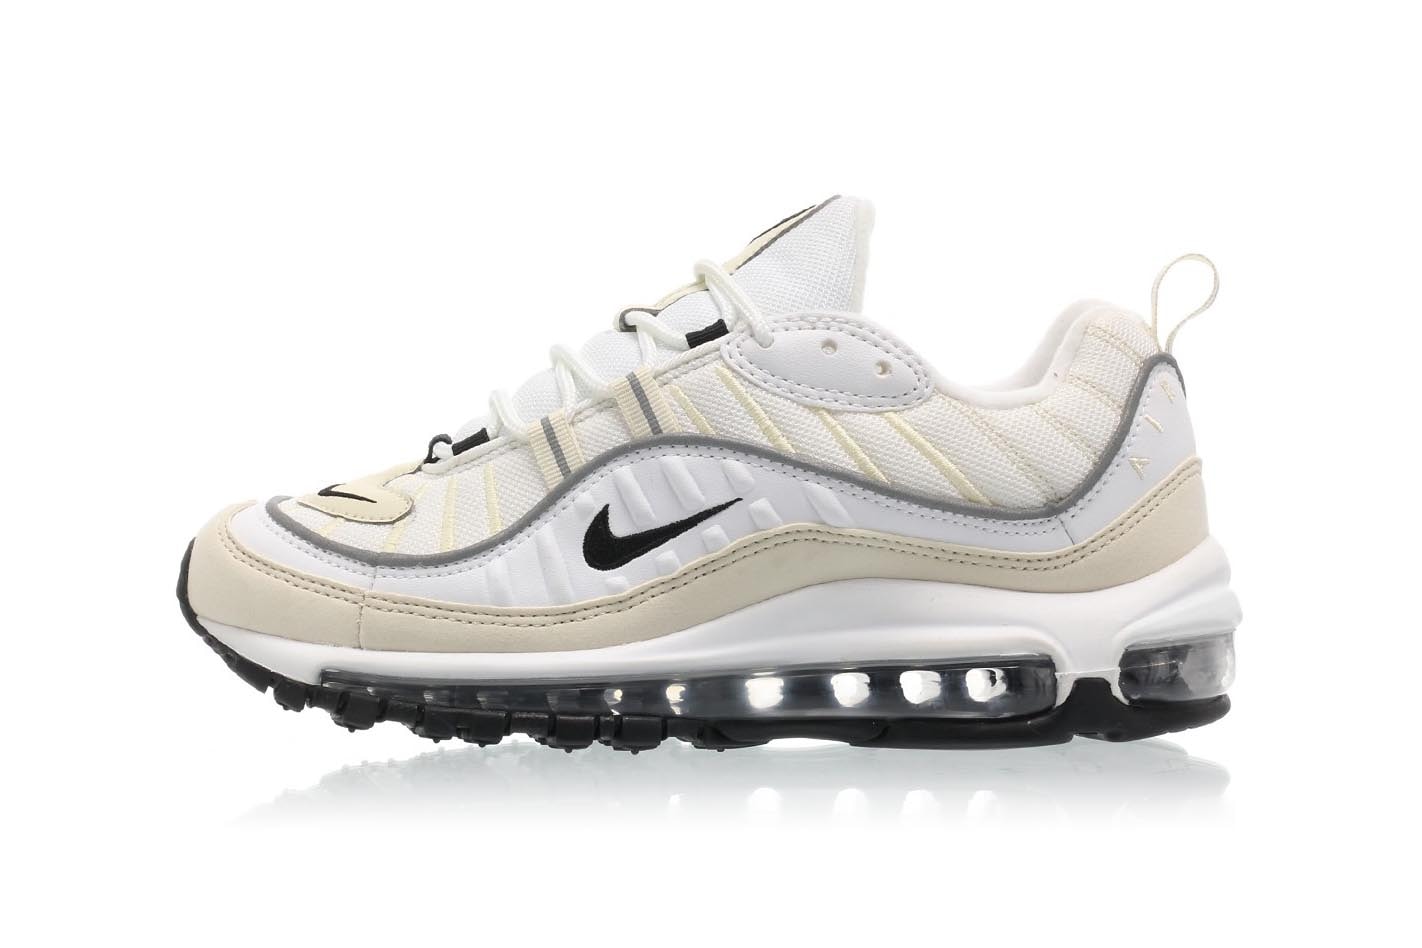 nike womens air max 98 white black fossil reflect silver cream off-white yellow beige minimal retro sneakers where to buy